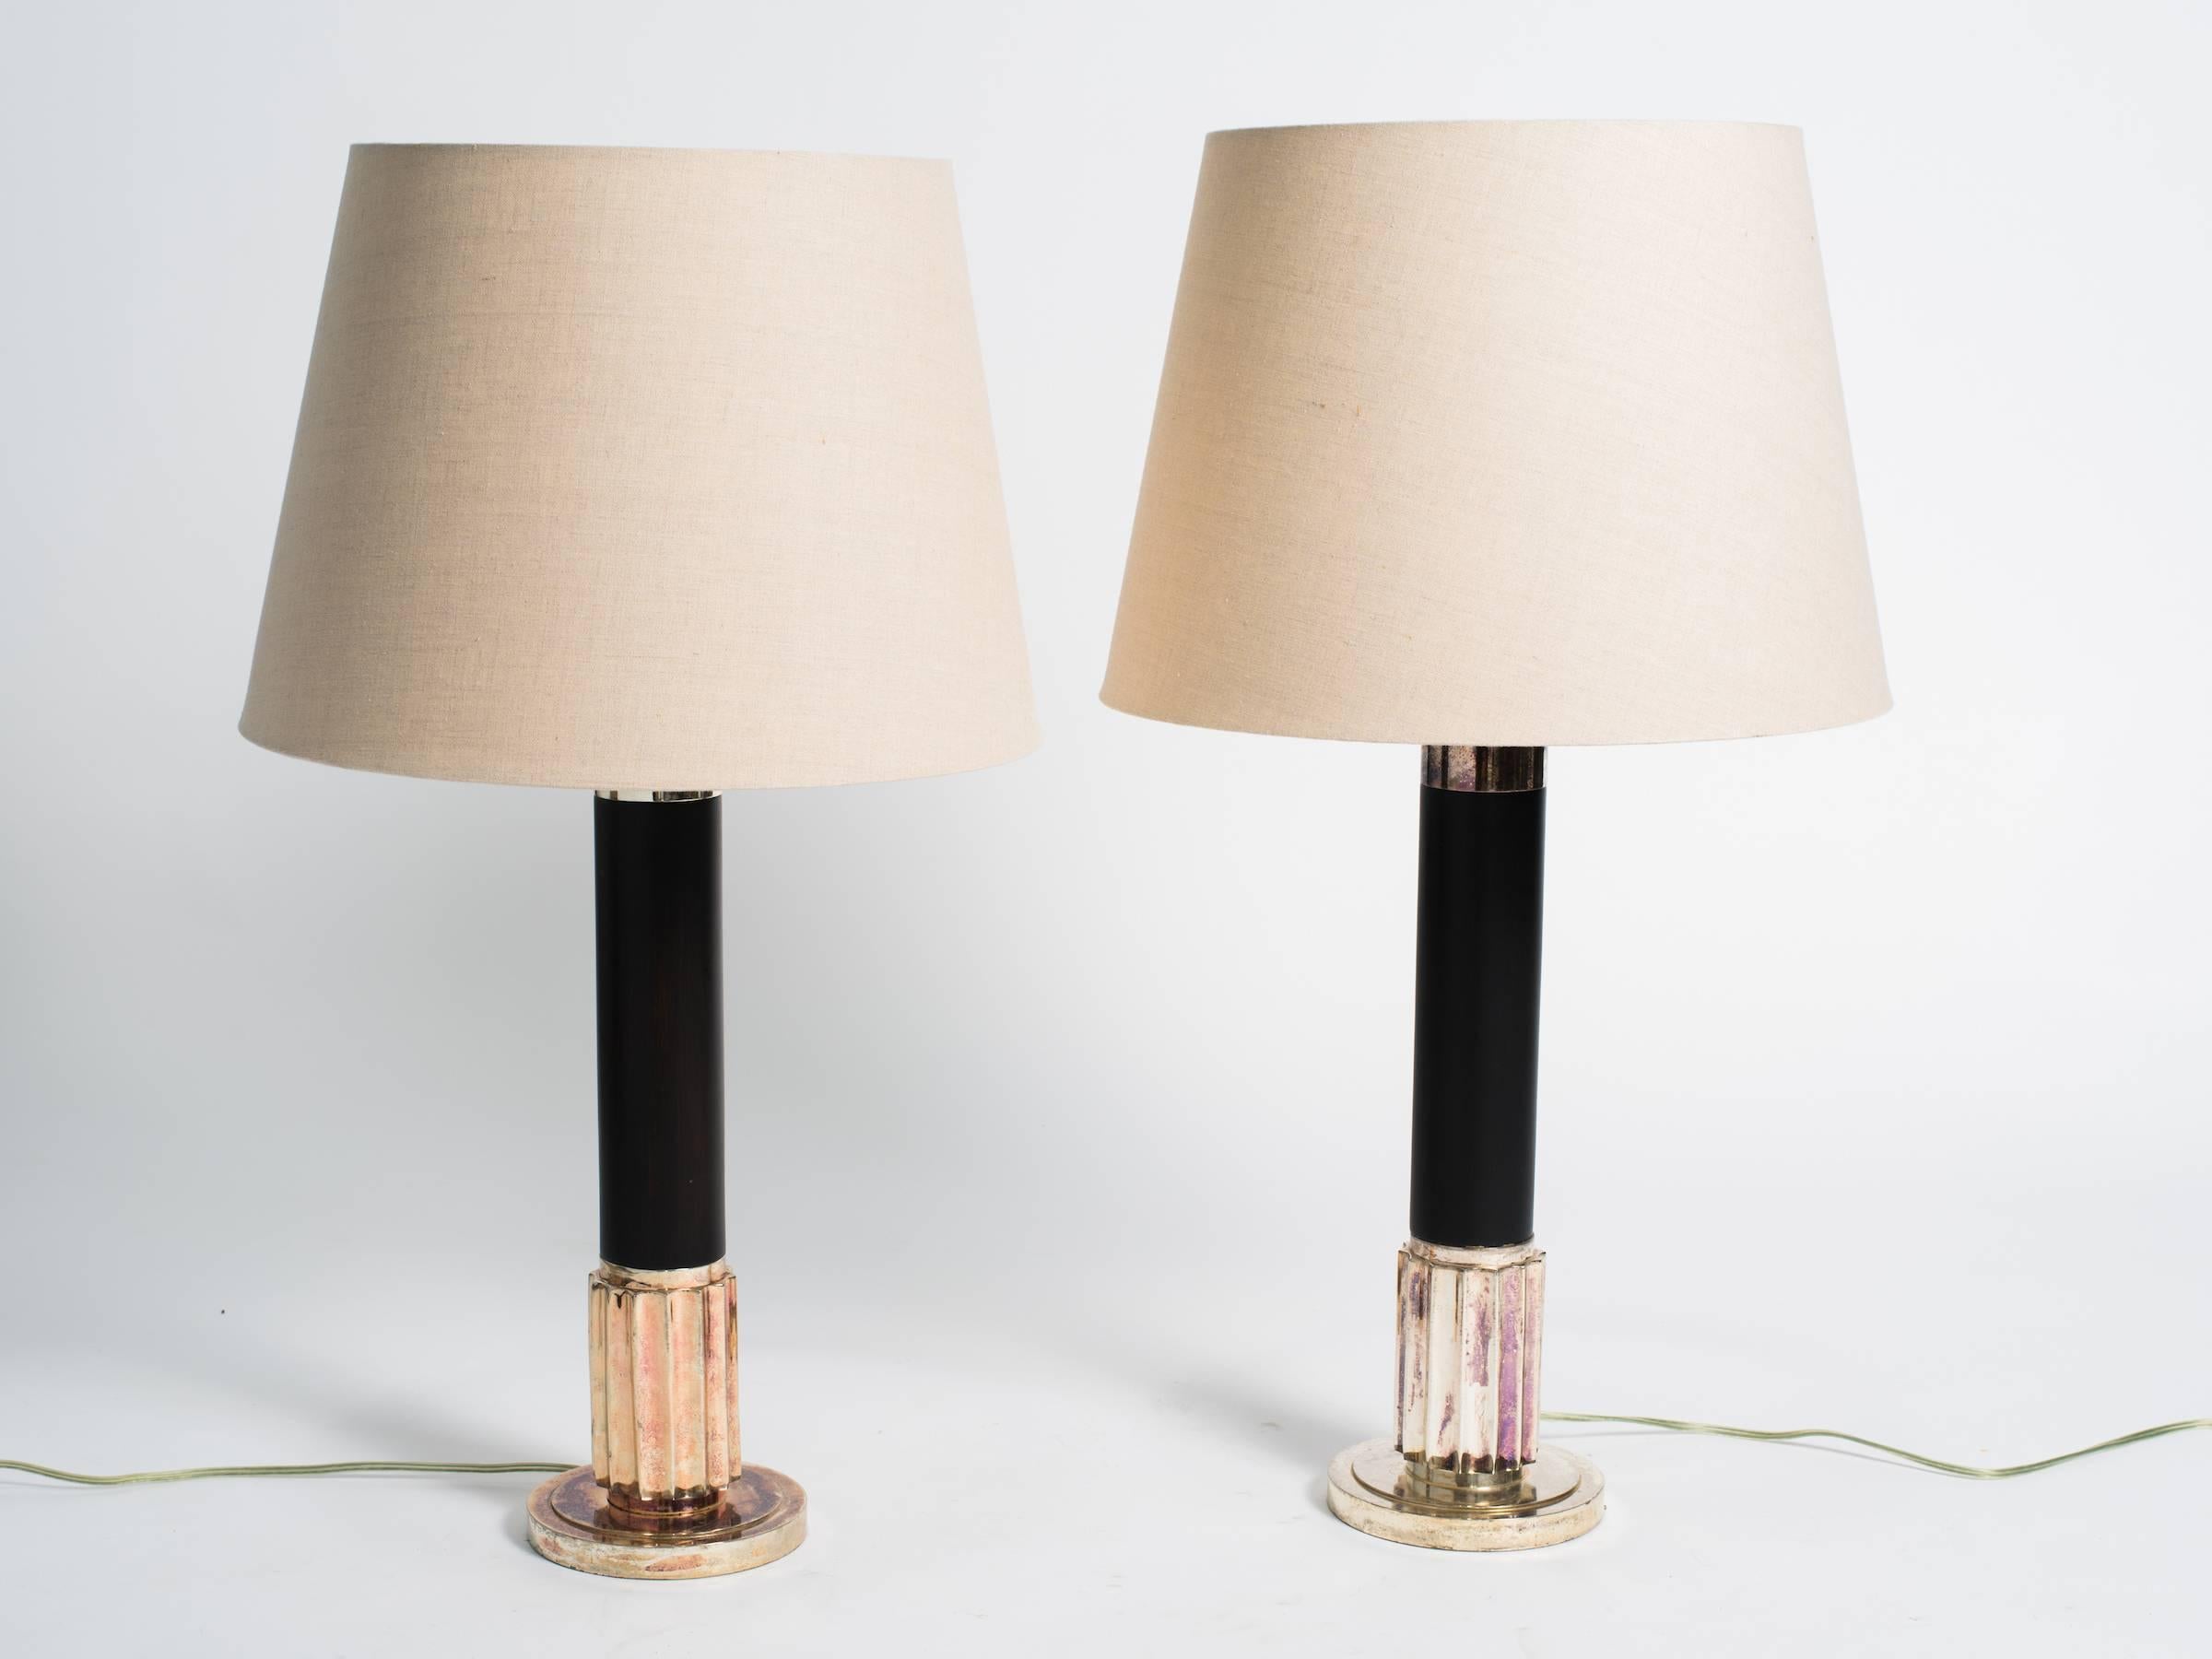 Deco style wood and silver plate Ralph Lauren lamps, with shades.

Dimensions are to the top of the socket.